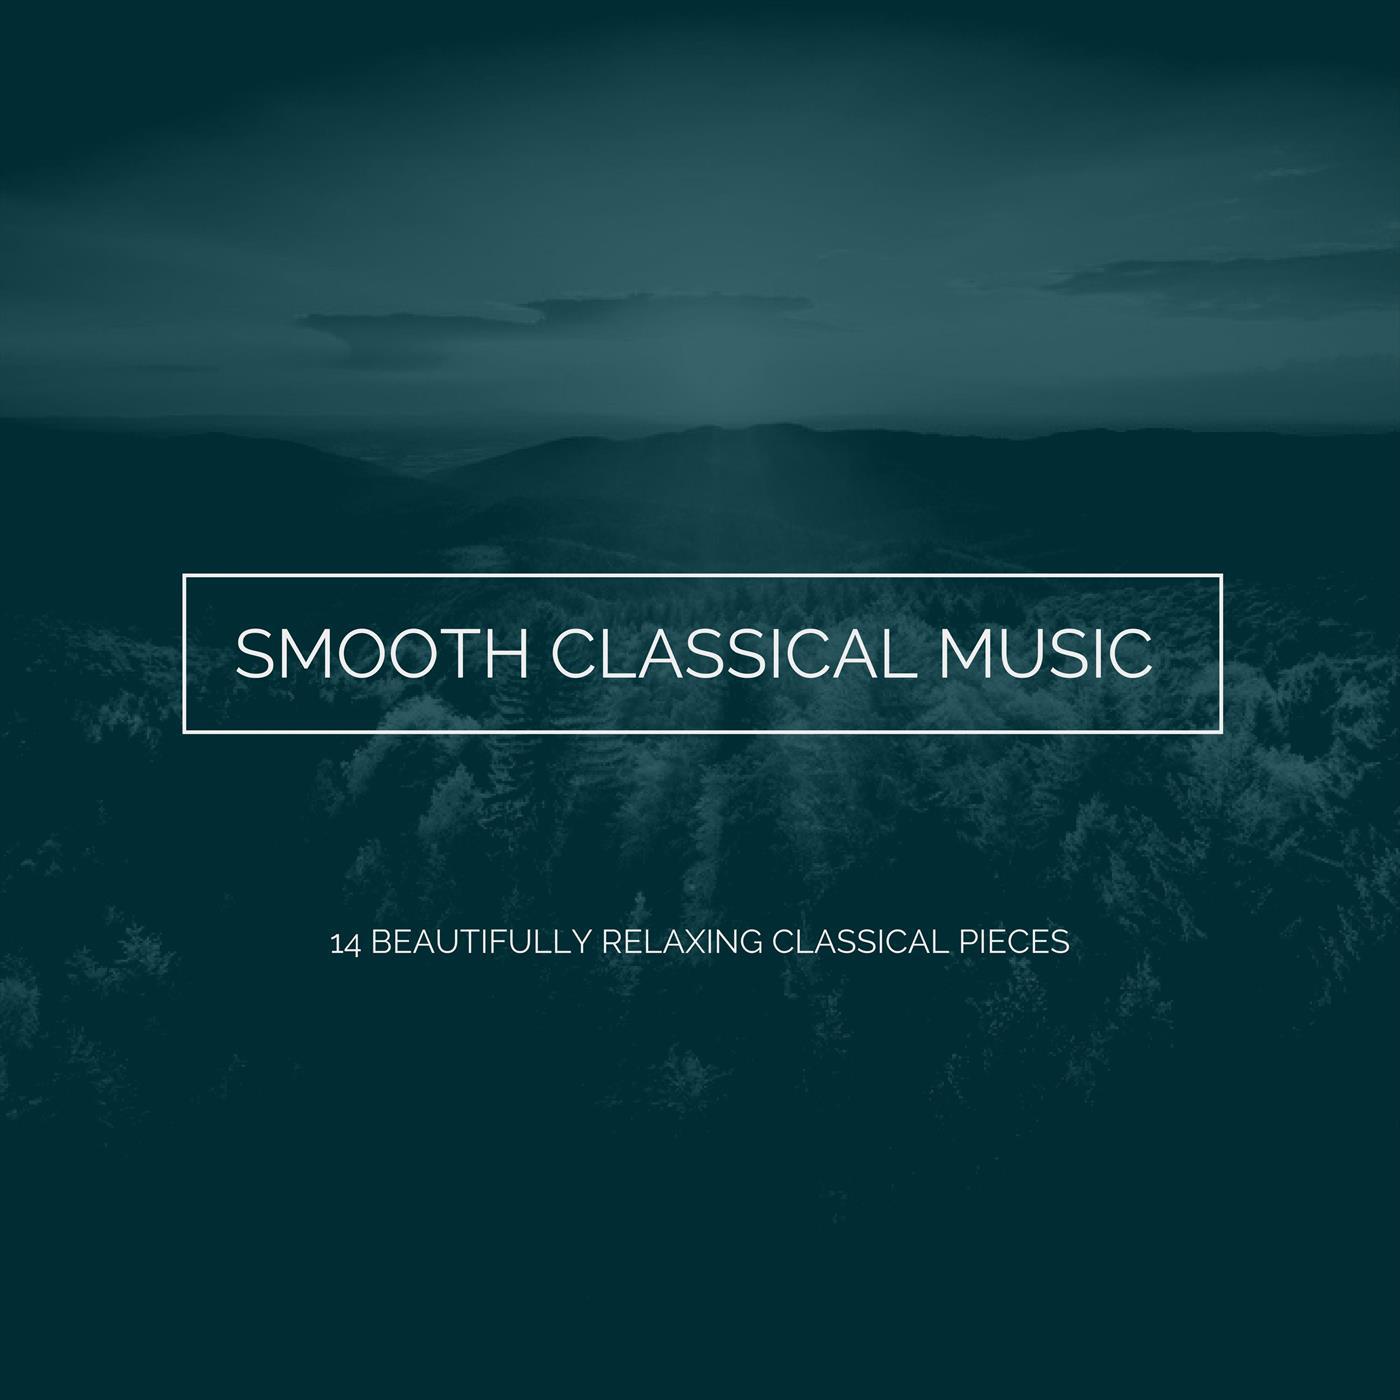 Smooth Classical Music: 14 Beautifully Relaxing Classical Pieces